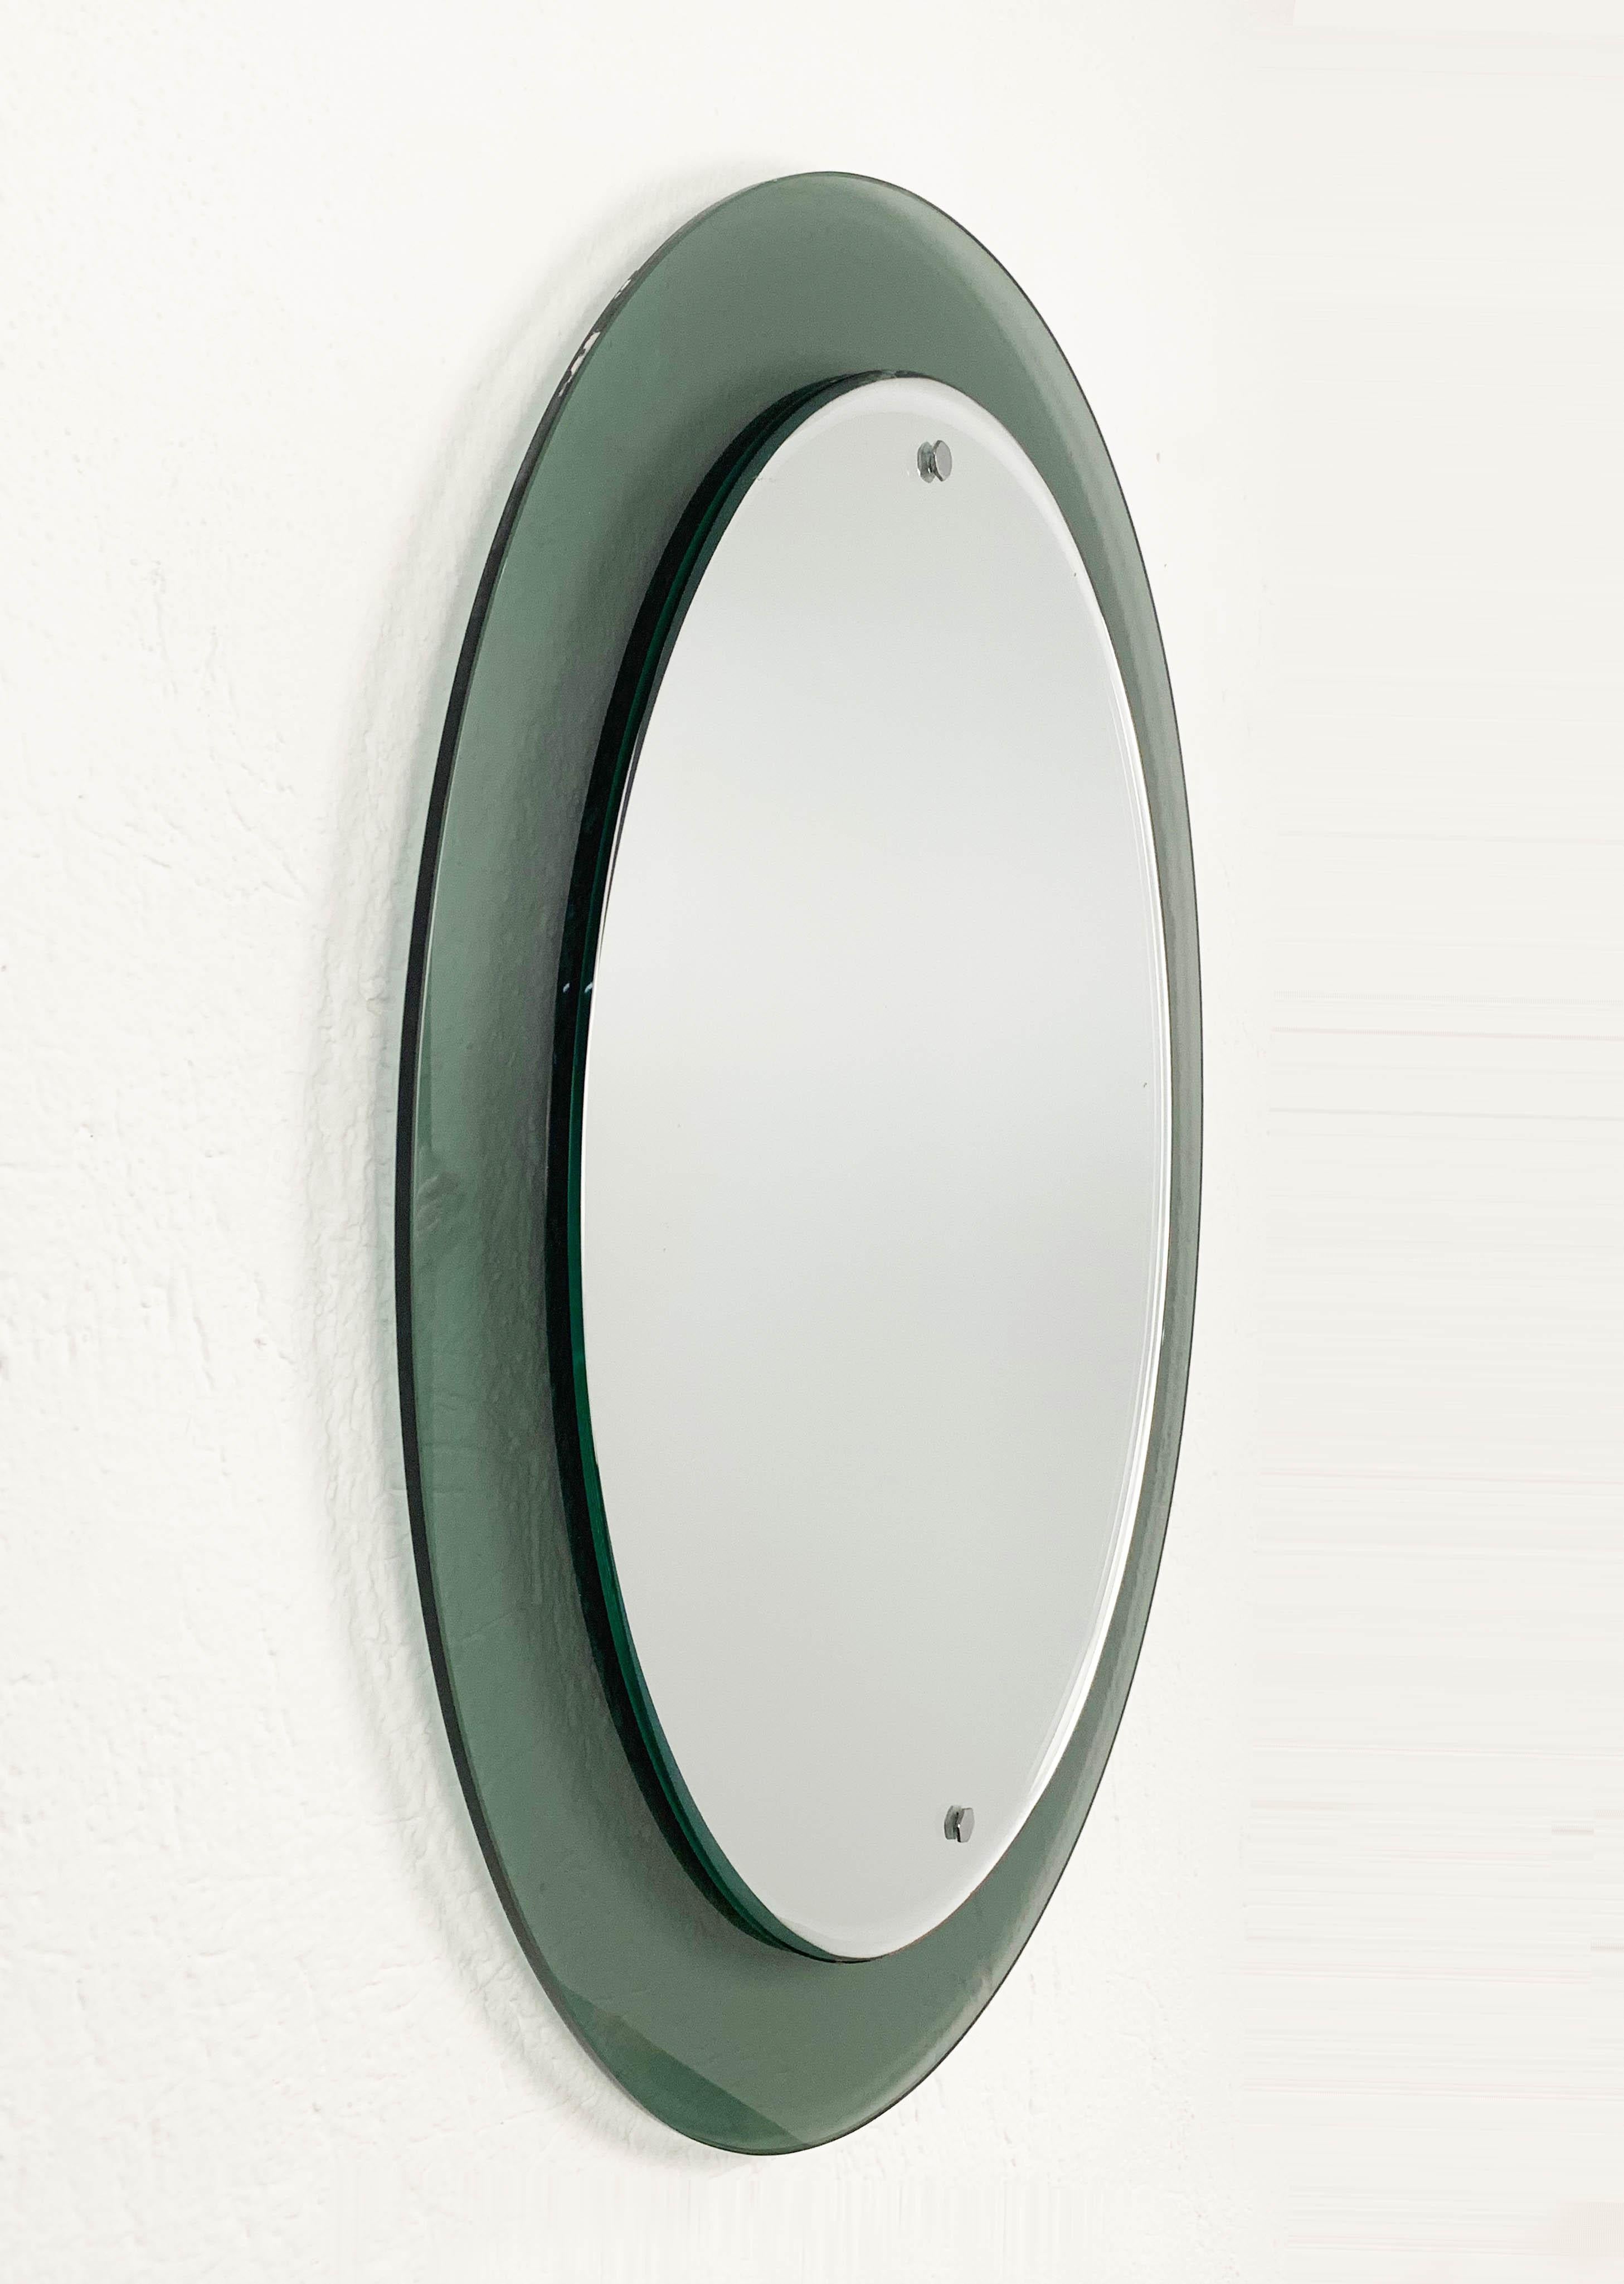 Wonderful midcentury oval wall glass framed mirror. This amazing oval double-level mirror was produced in Italy during the 1960s and it was probably designed by Cristal Art Italy.

In its essential, pure midcentury design and lines, it features a